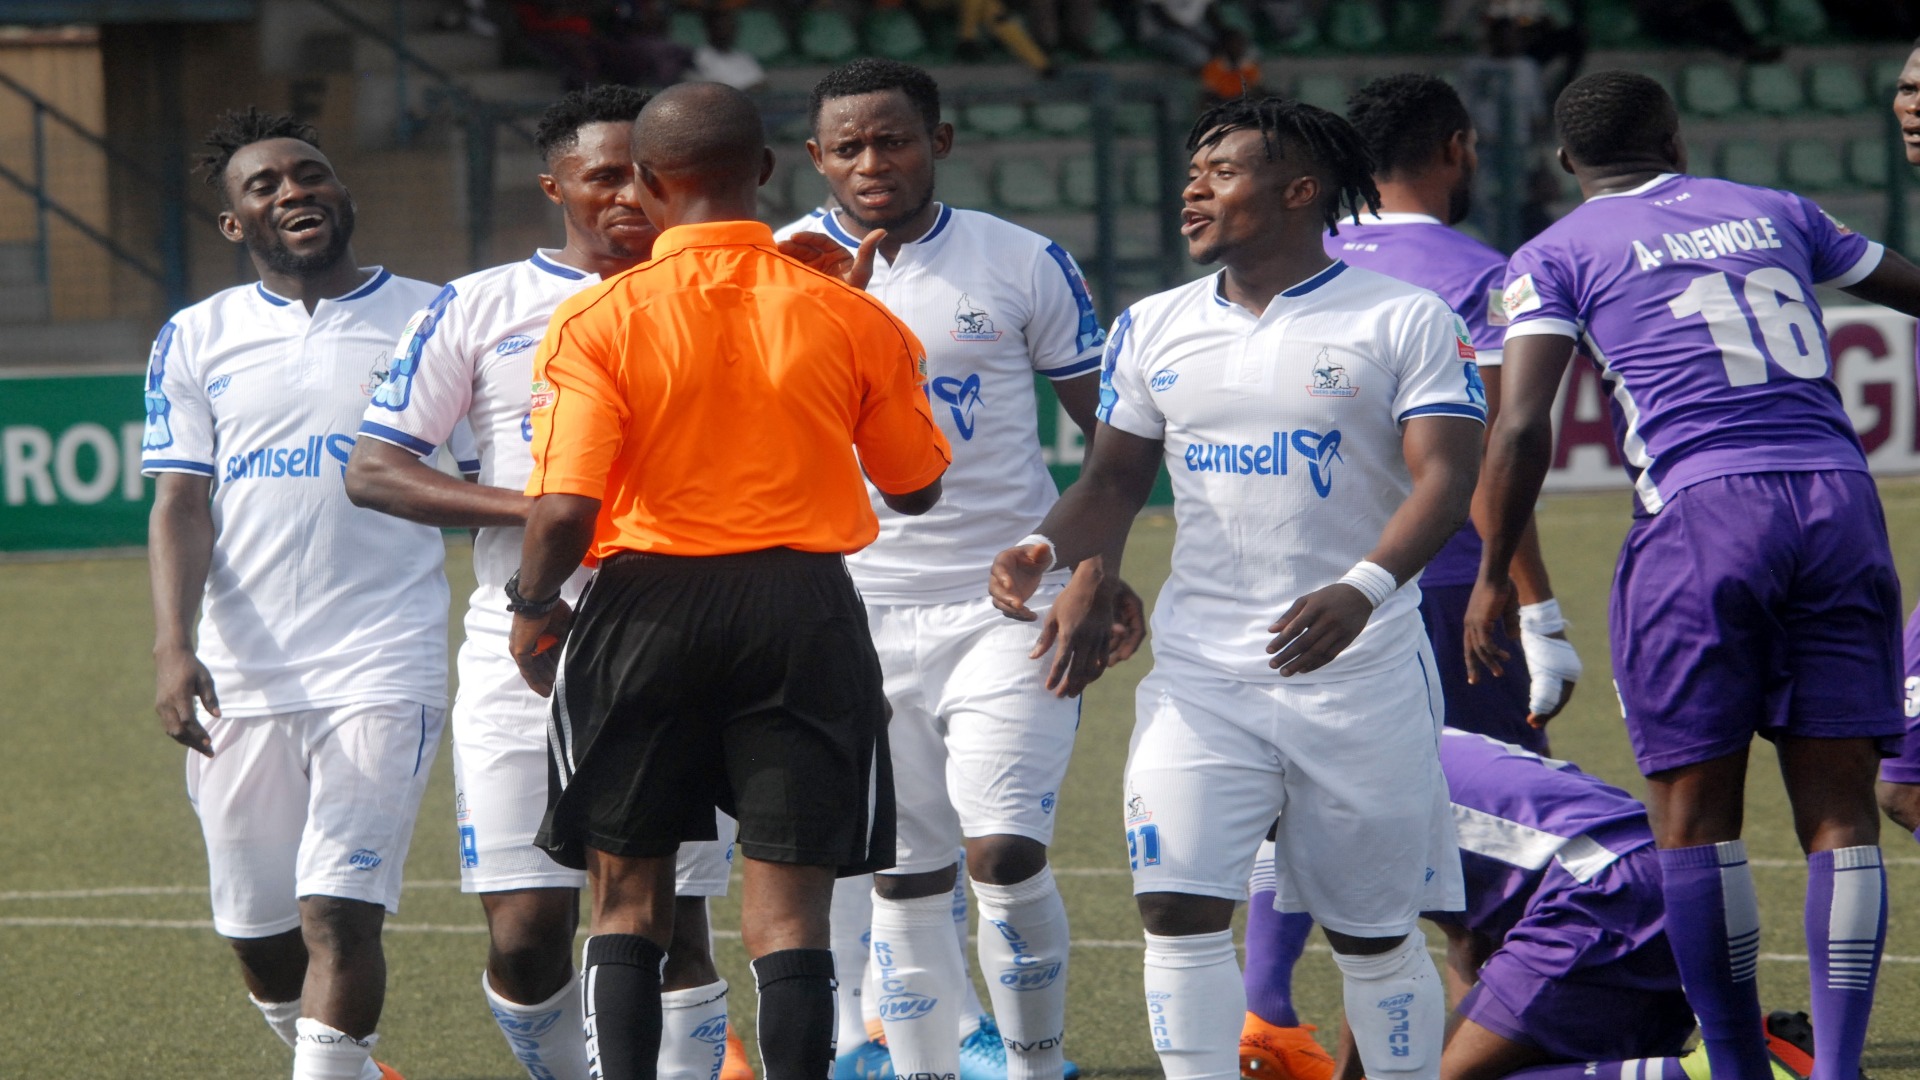 Caf Champions League: Saeed Ahmed’s own goal saves Rivers United against Al Hilal